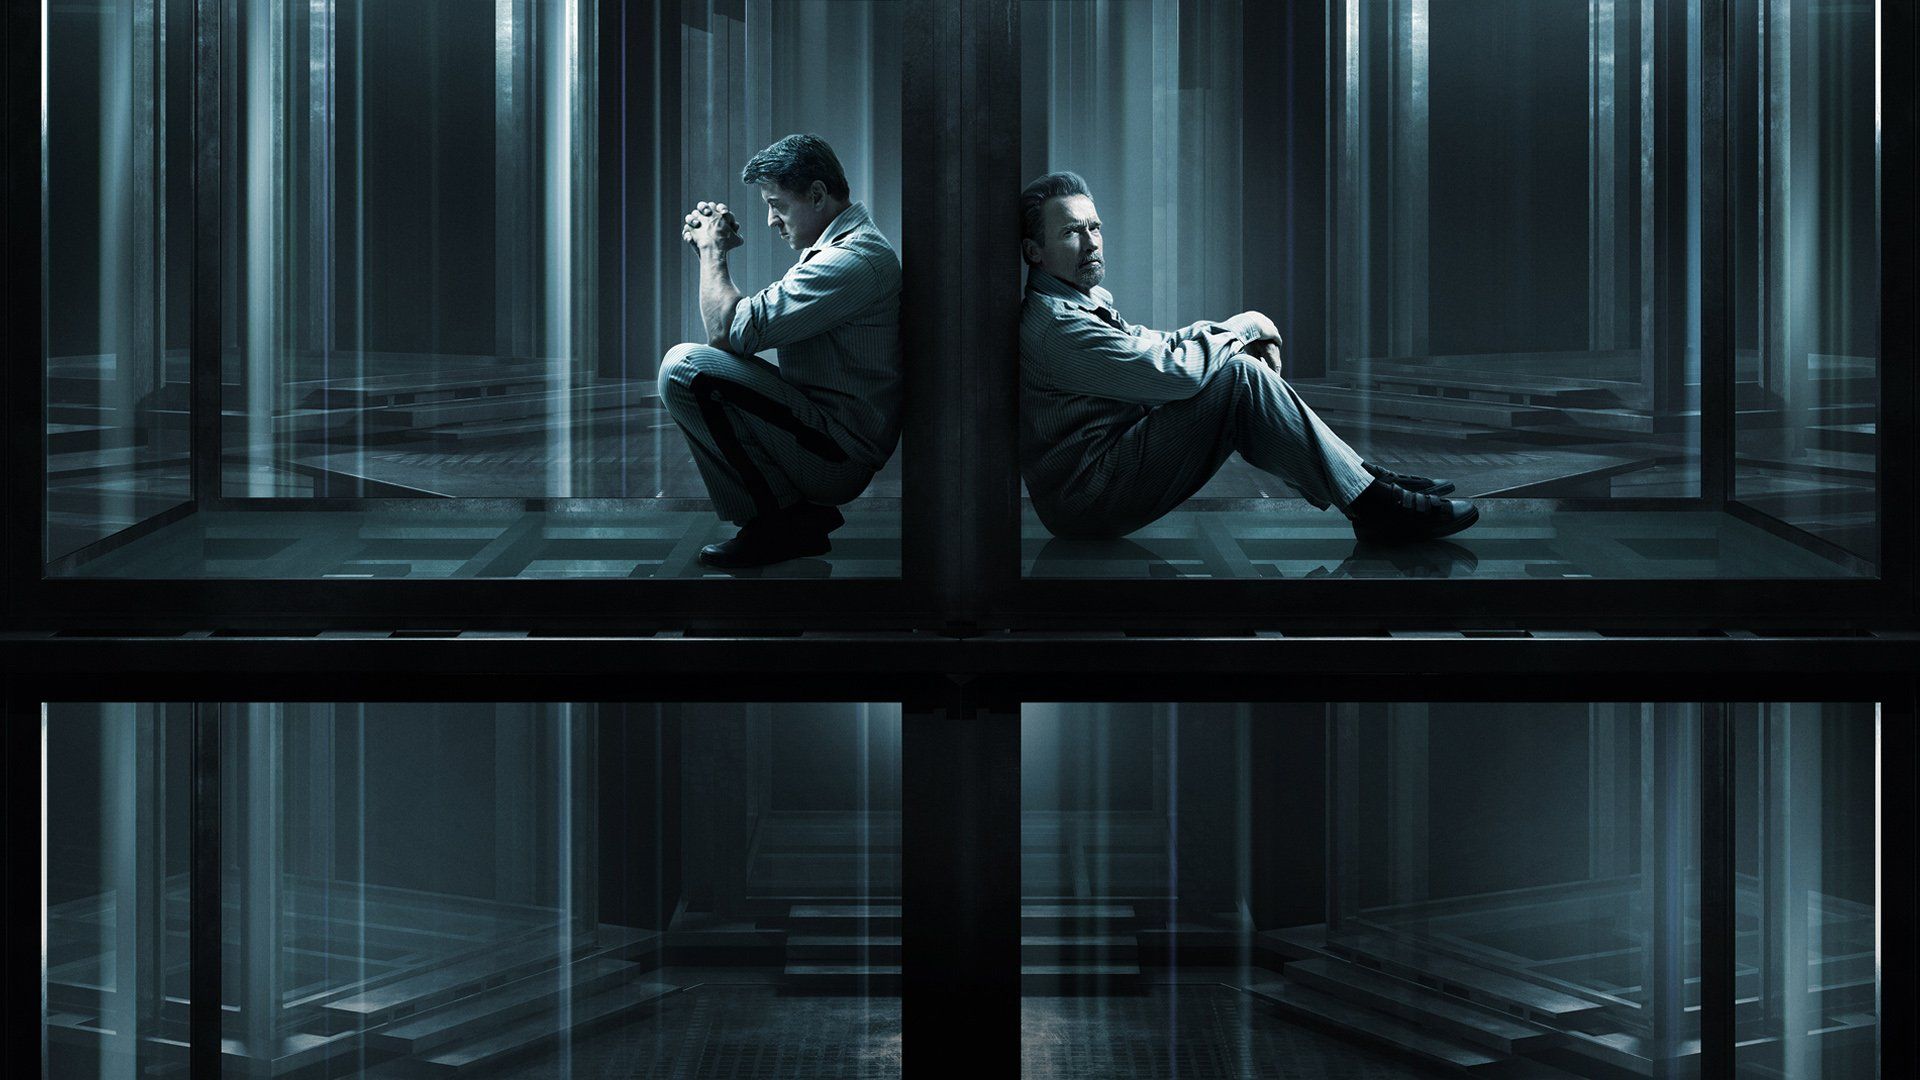 Escape Plan The Extractors Wallpapers